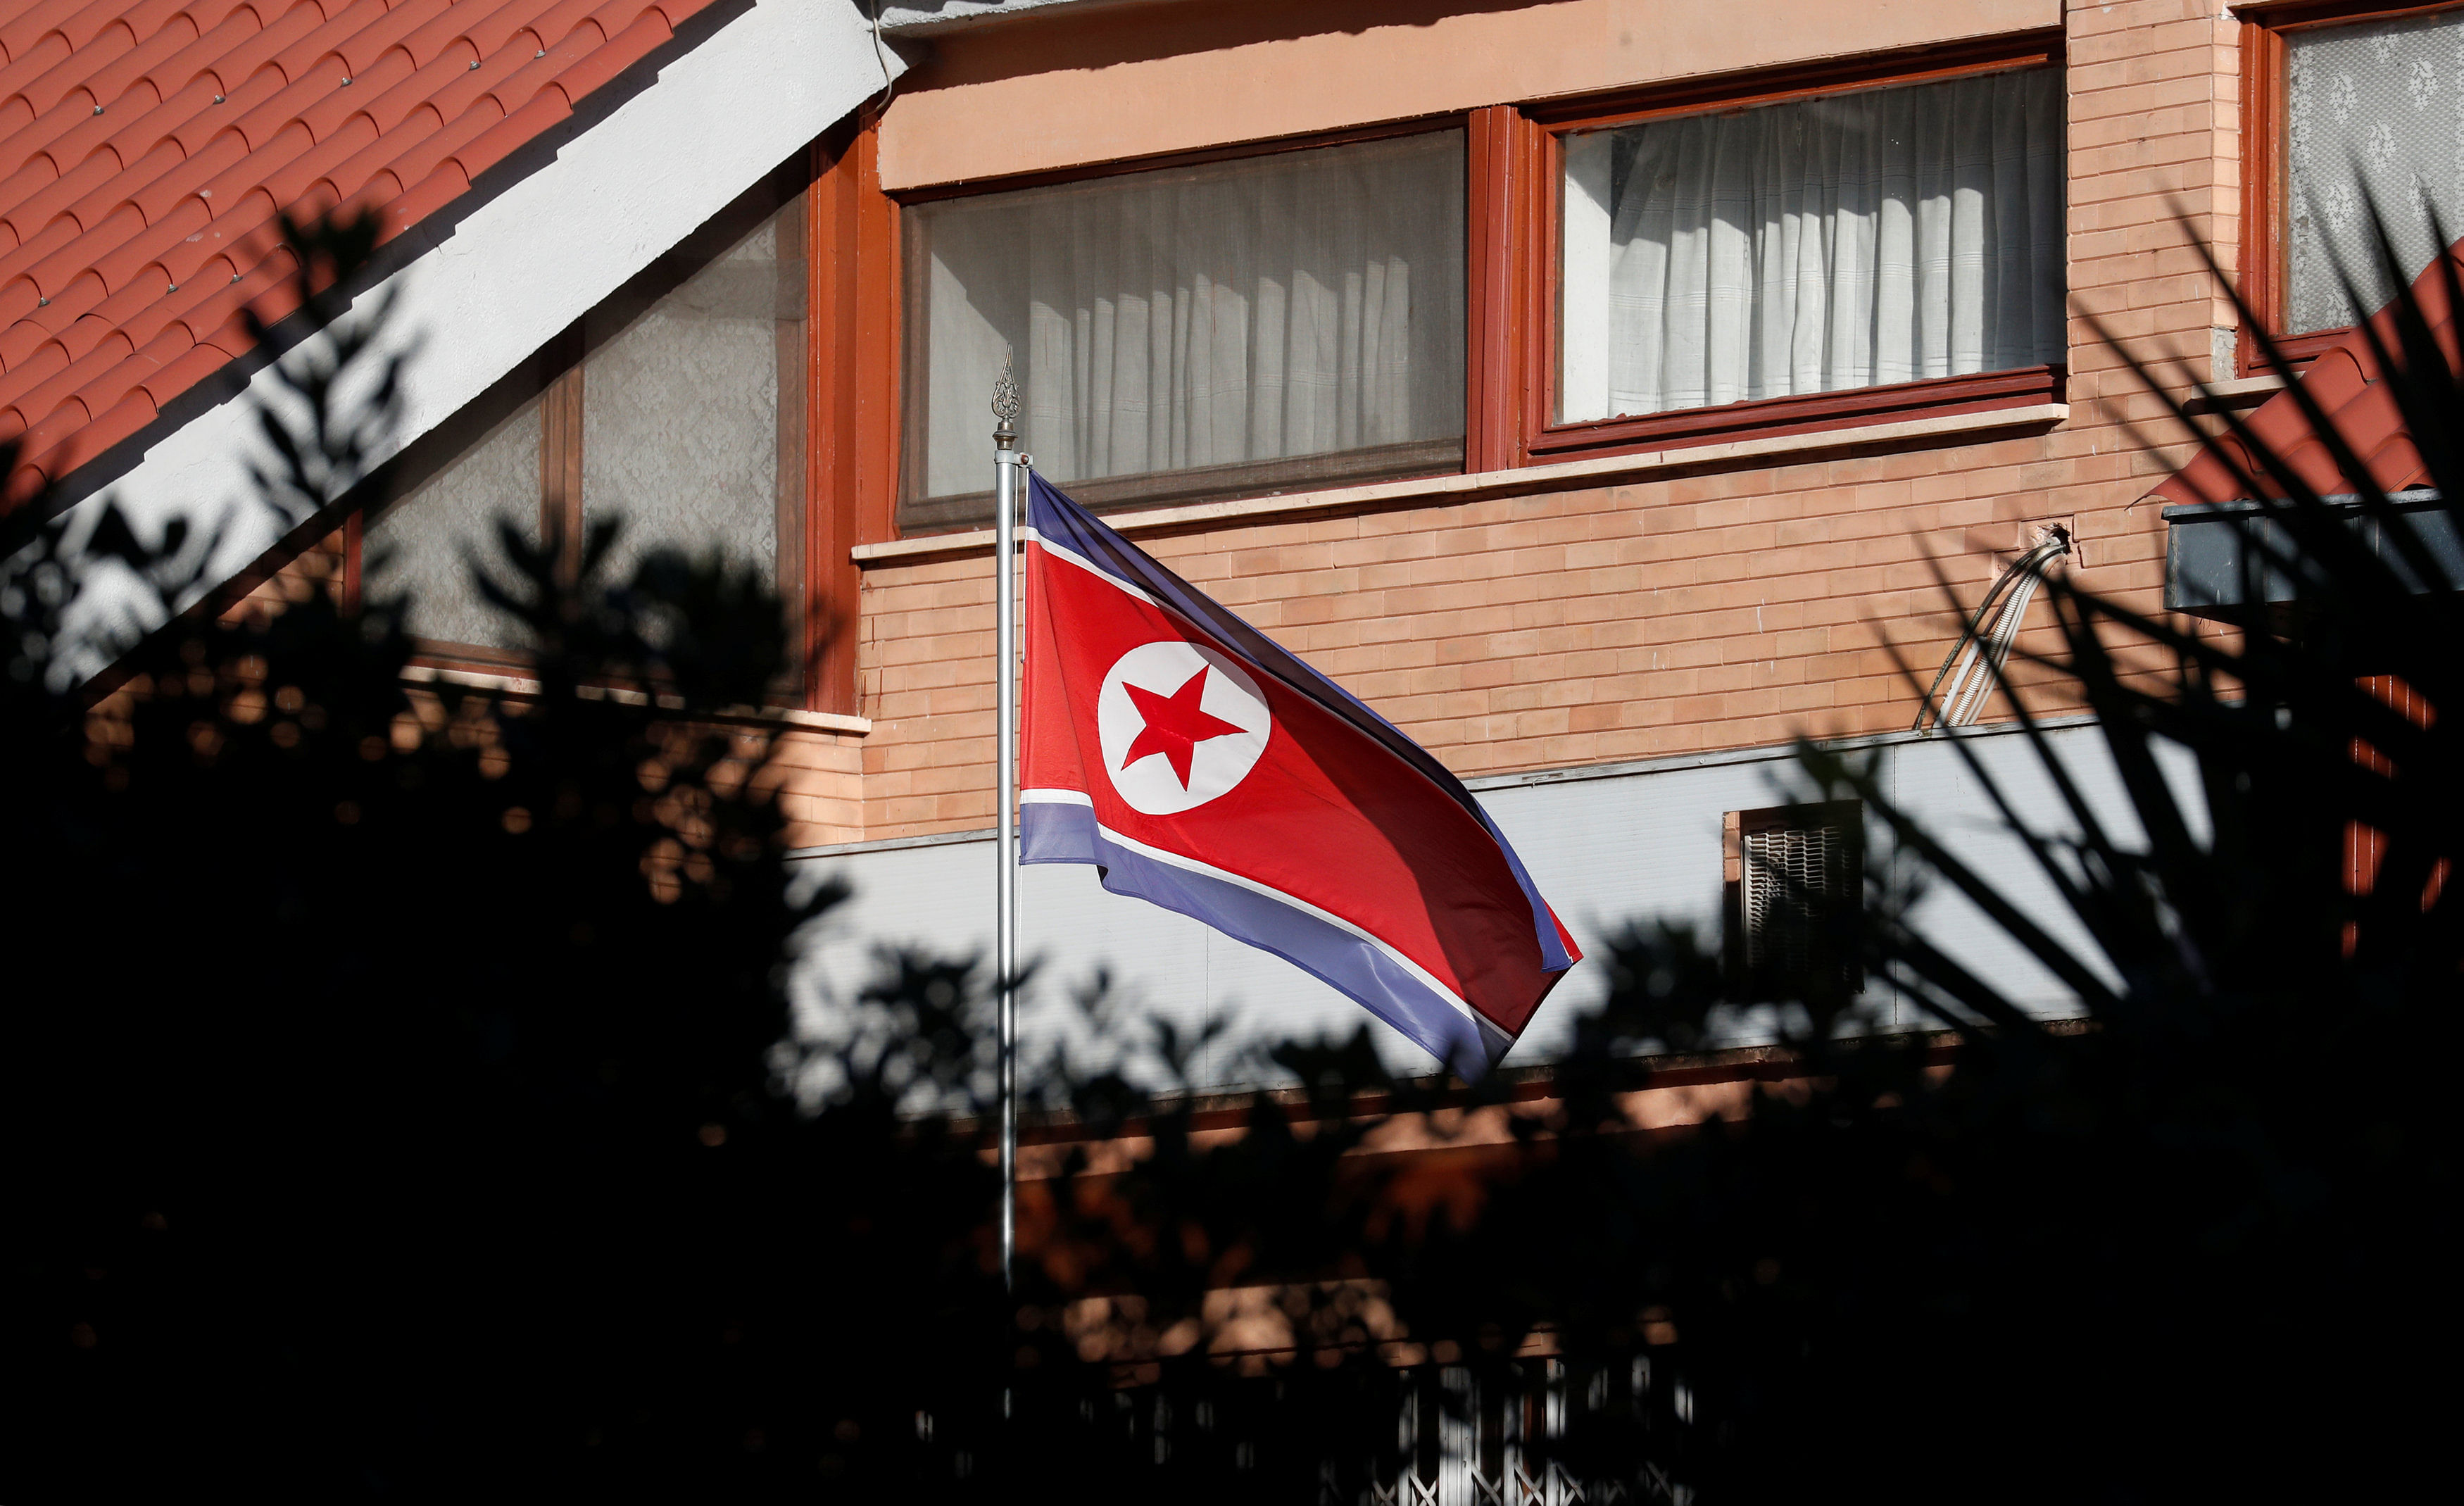 Drastic measures taken by North Korea to contain Covid-19 have exacerbated human rights abuses and economic hardship for its citizens. Credit: Reuters File Photo